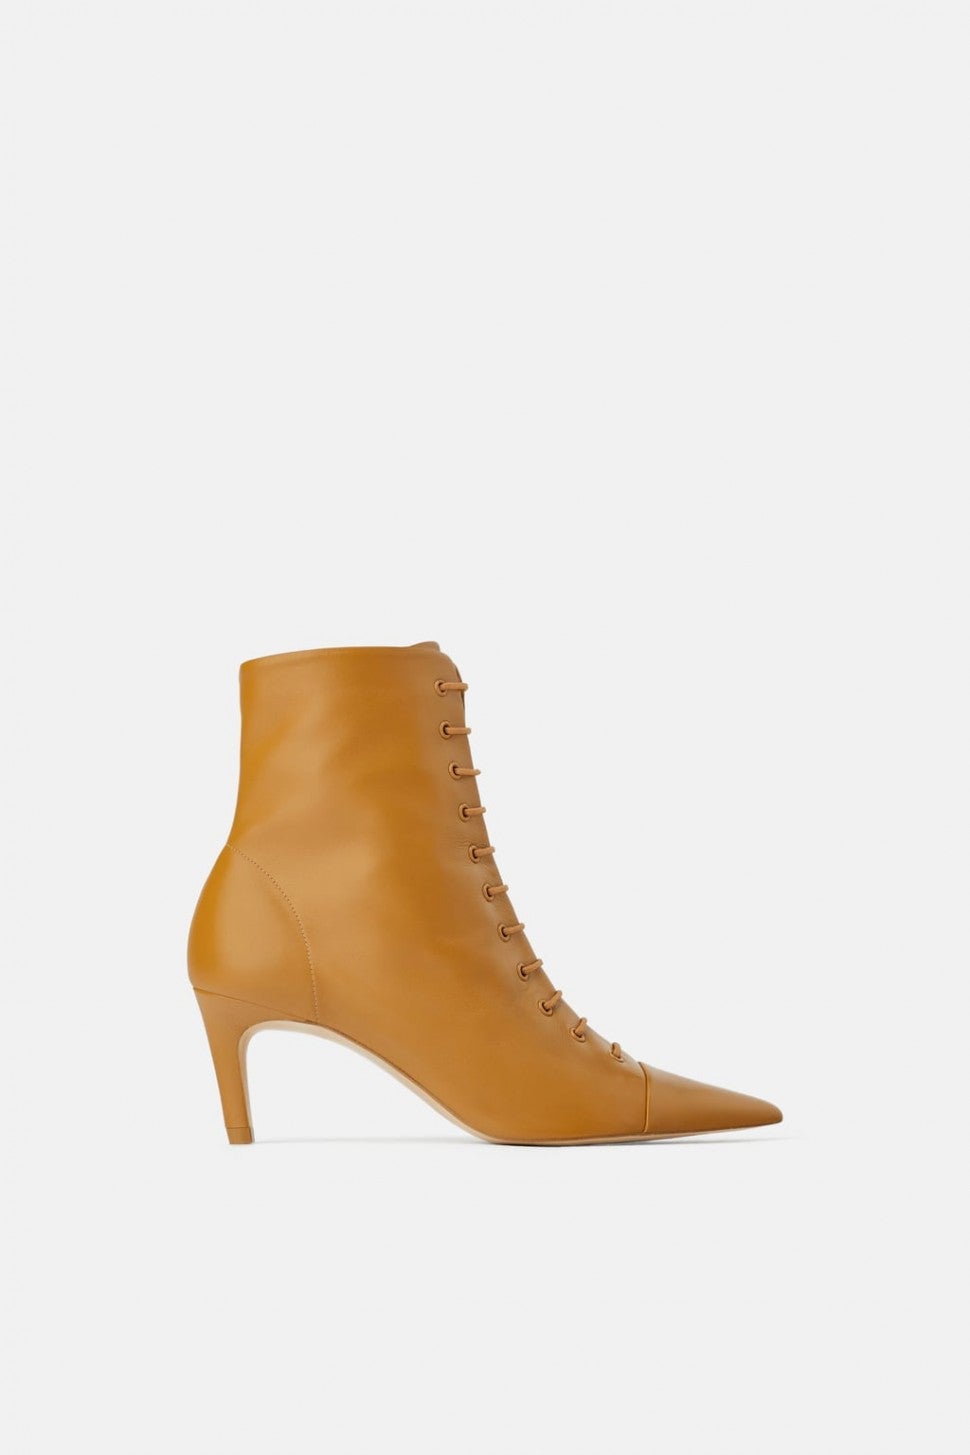 Zara lace-up bootie